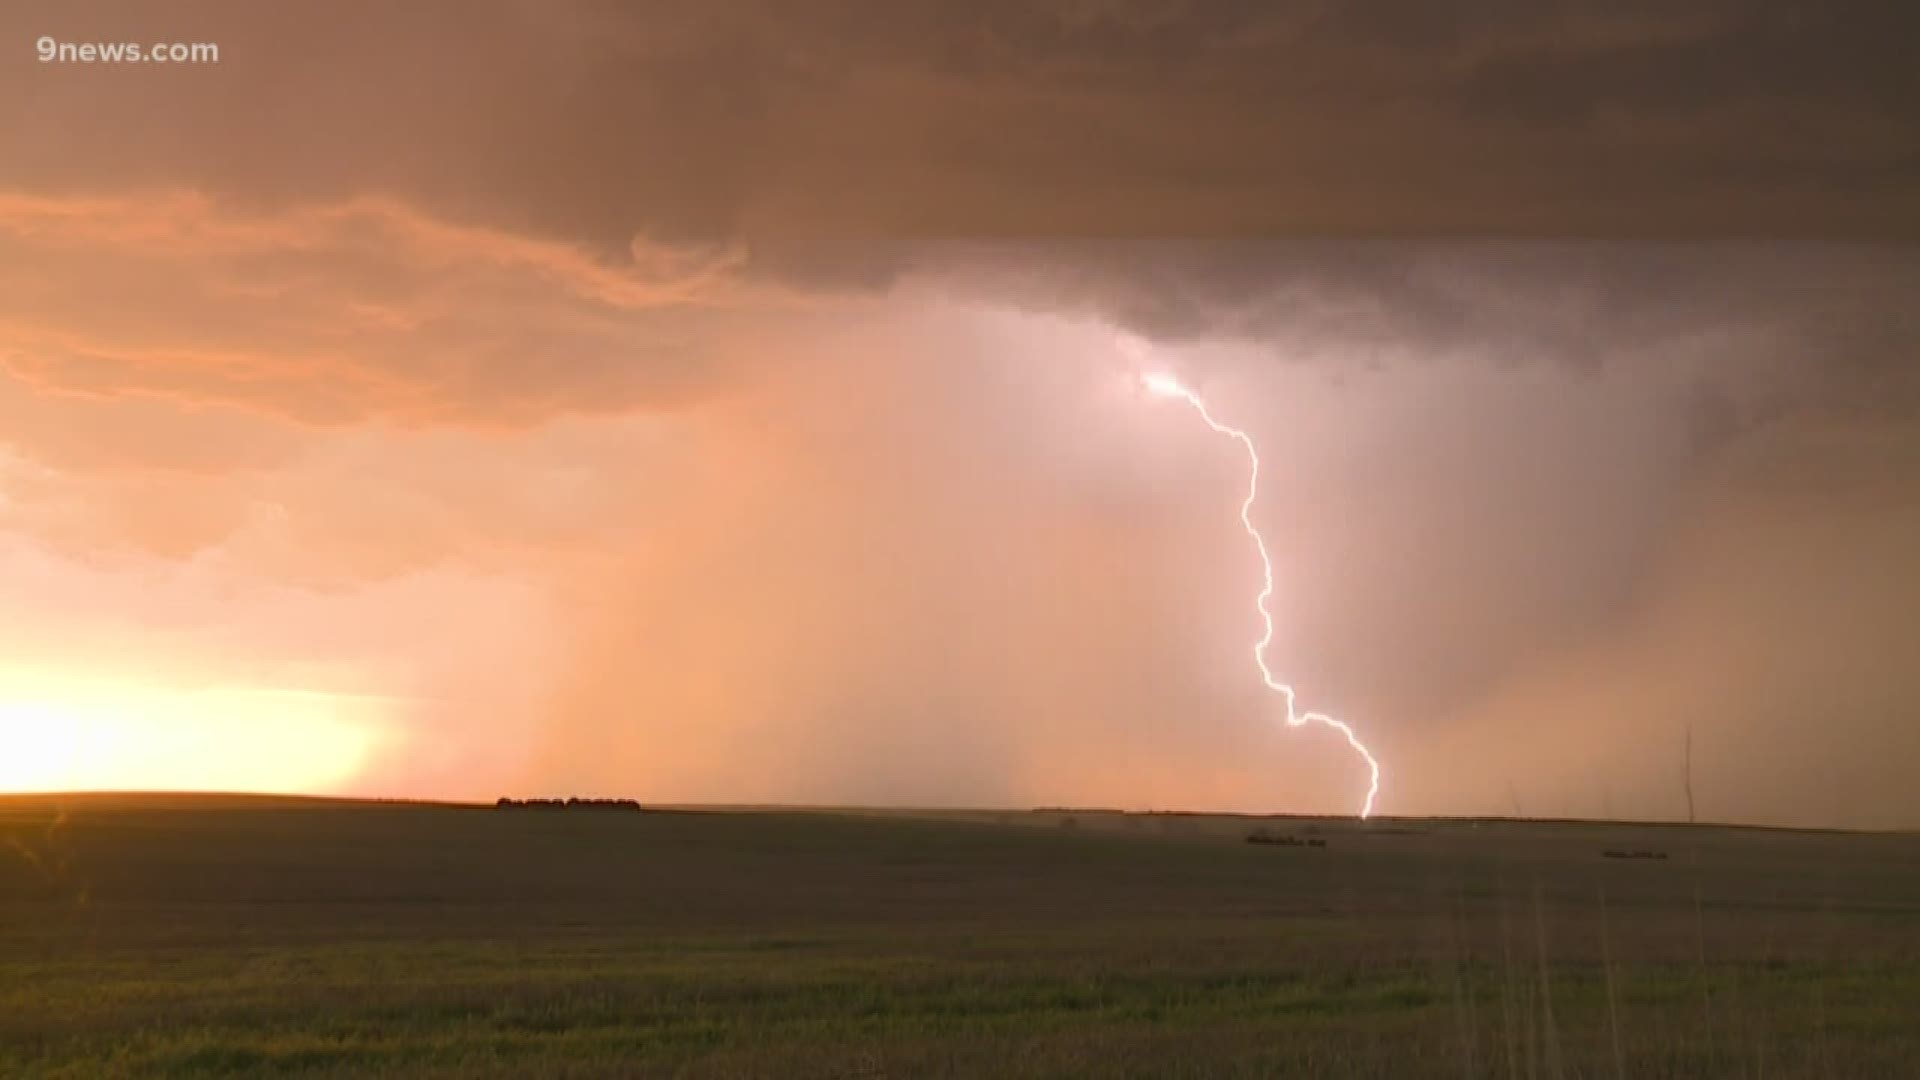 There were more than 3.7 million lightning flashes in Colorado last year, according to the National Lightning Detection Network.